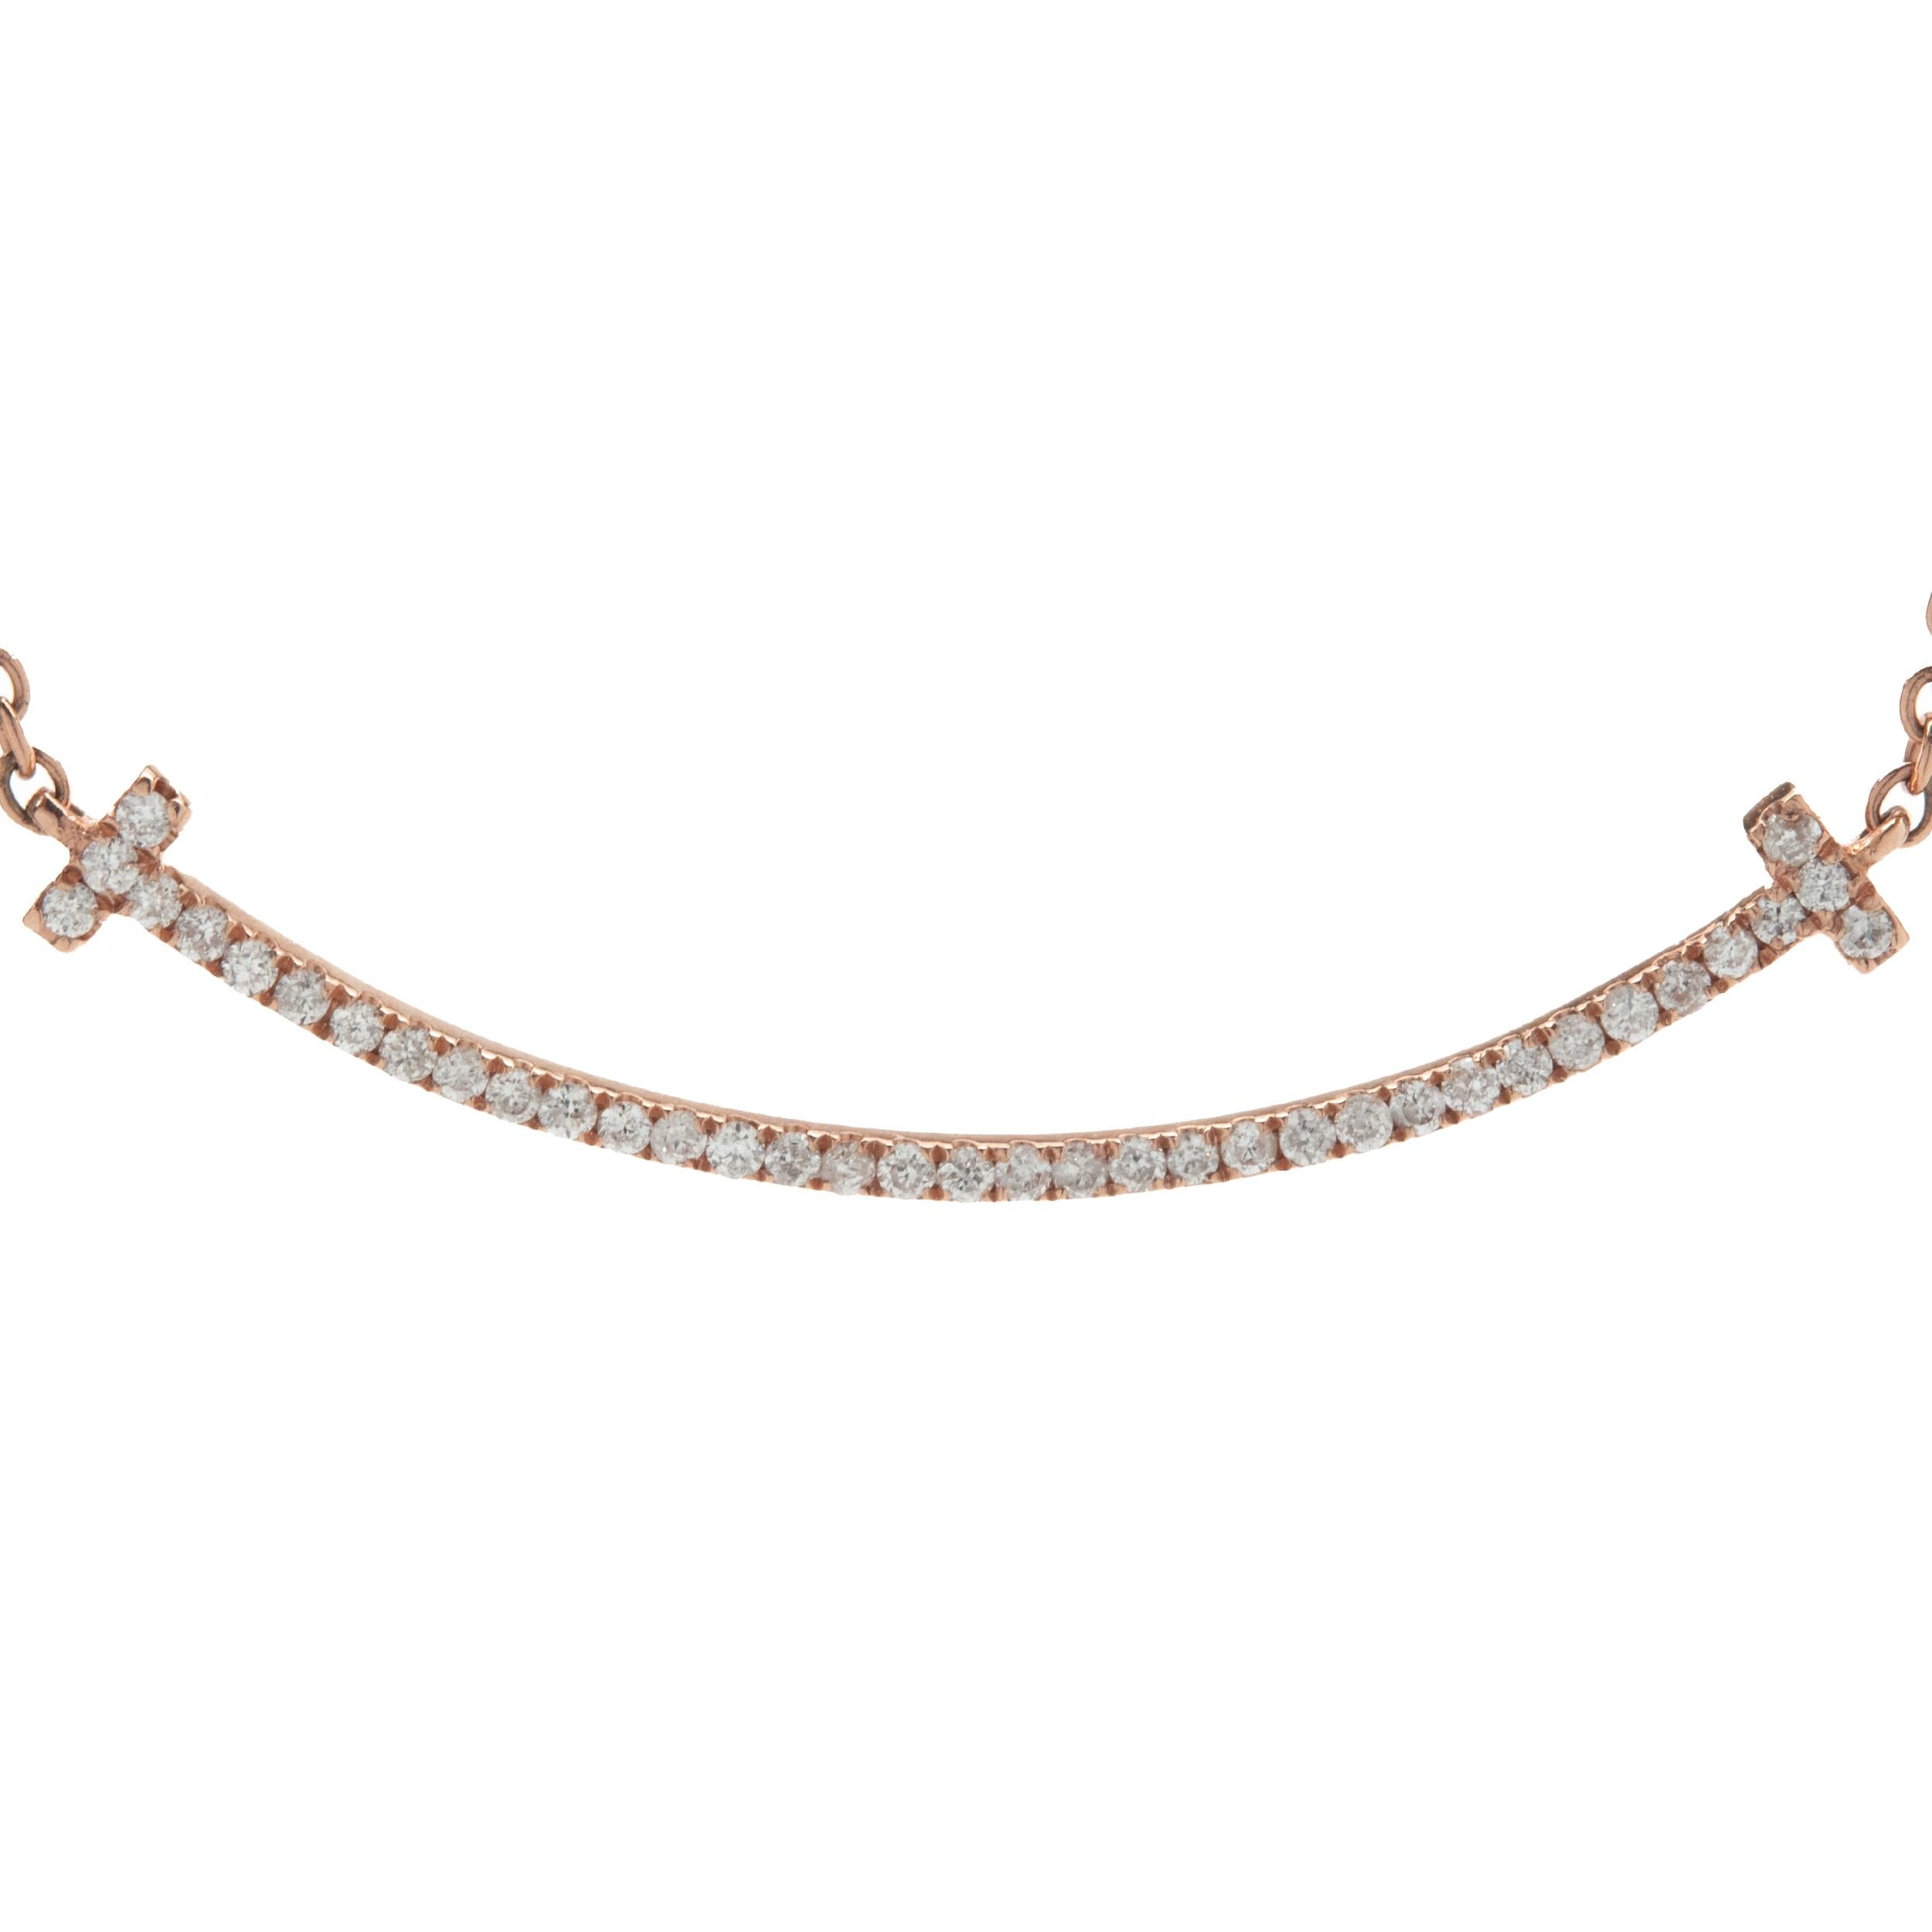 Designer: custom
Material: 18K rose gold
Diamonds: 38 round brilliant cut = .12cttw
Color: G
Clarity: VS1
Dimensions: necklace measures 18-inches in length 
Weight: 2.72 grams
